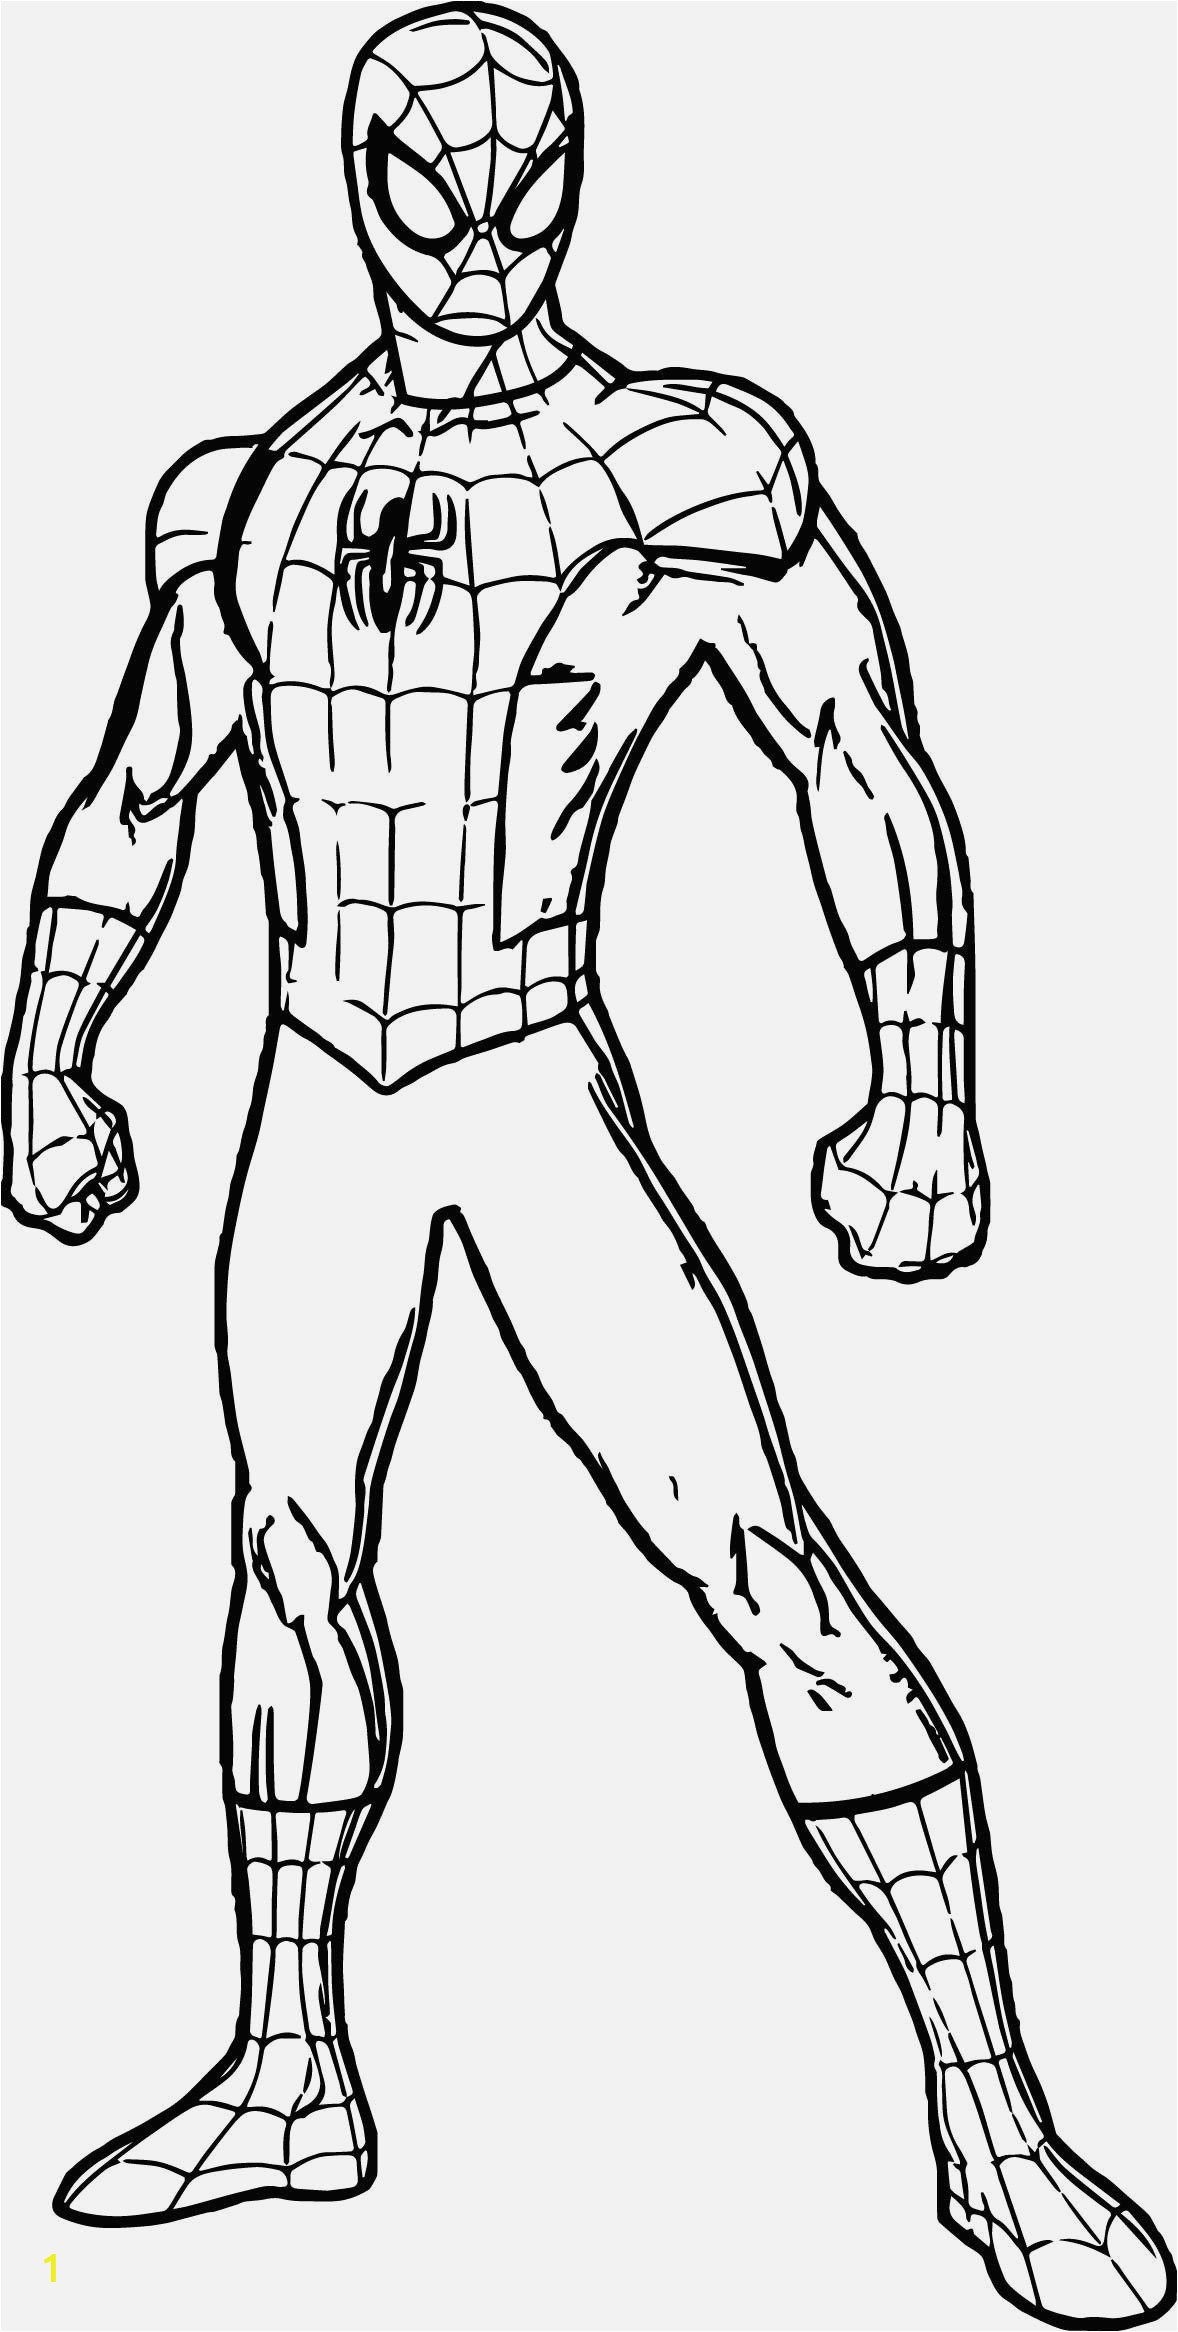 Spider Man Lizard Coloring Pages Marvelous Image Of Free Spiderman Coloring Pages